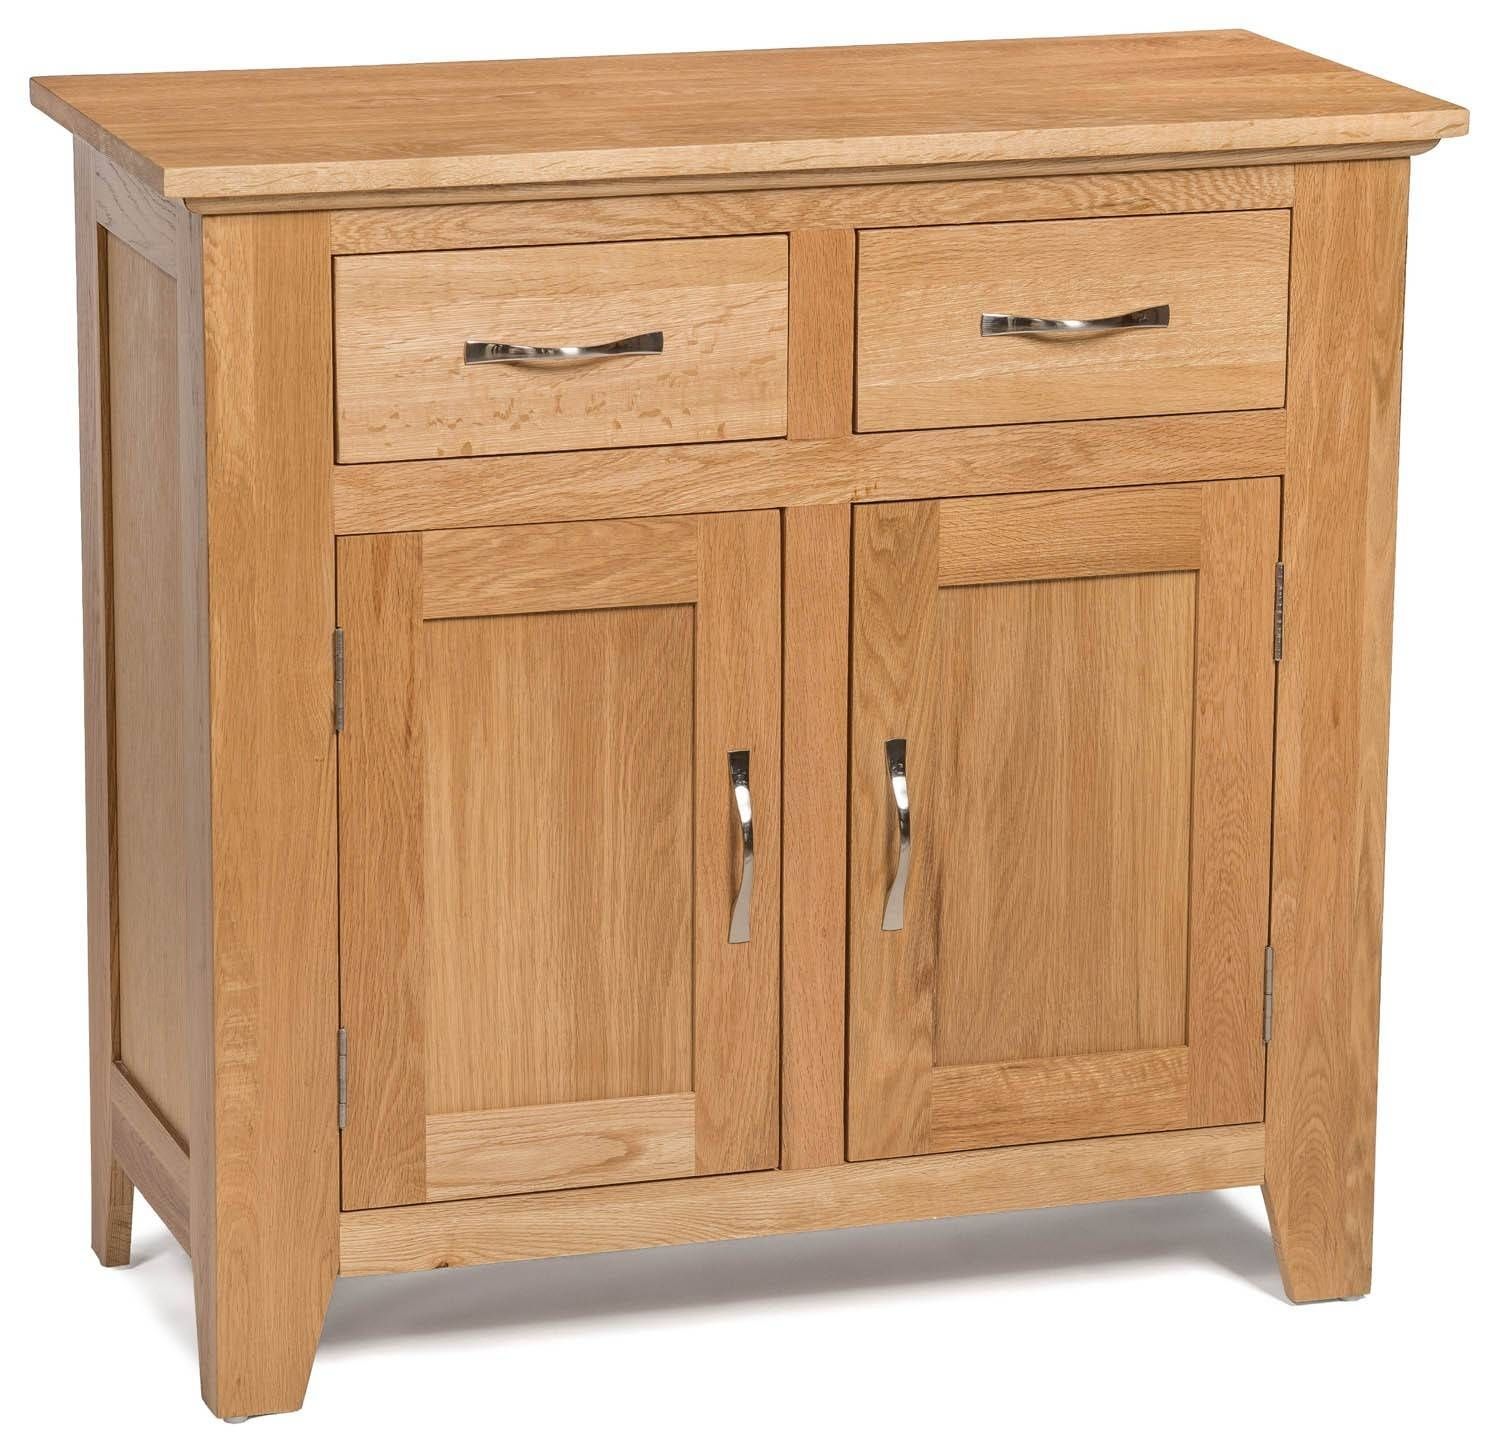 Camberley Oak Small 2 Door 2 Drawer Sideboard – Sideboards & Tops Throughout Small Wooden Sideboard (View 7 of 20)